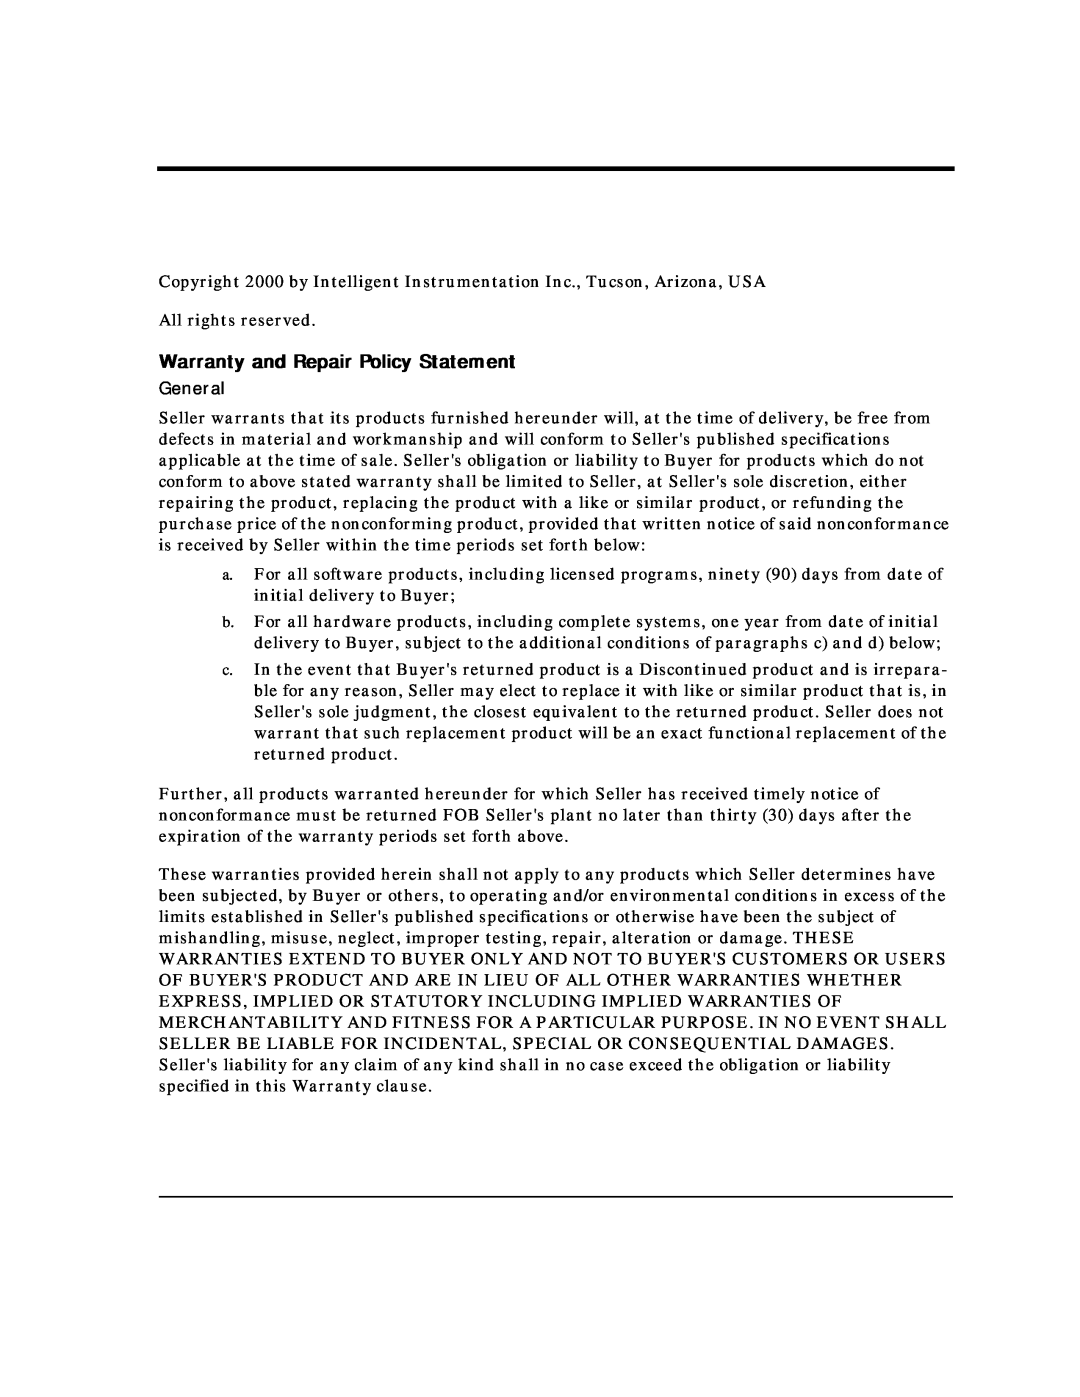 Intelligent Motion Systems UDAS-1001E user manual Warranty and Repair Policy Statement, General 